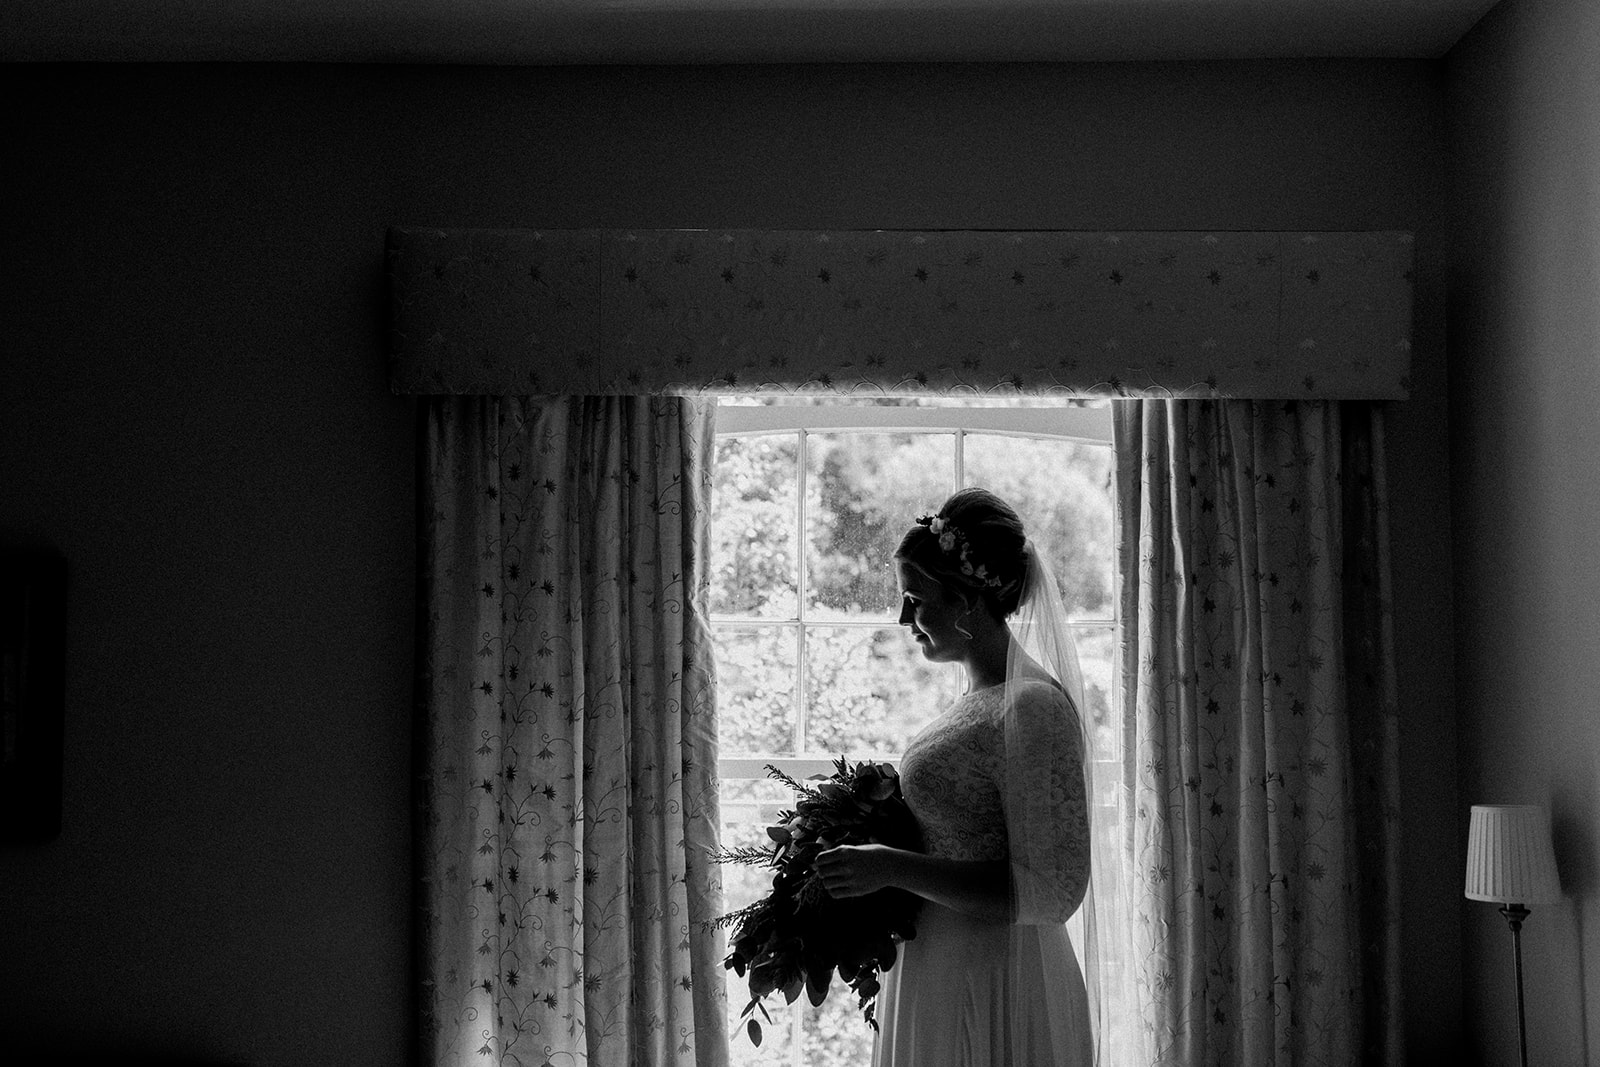 Celtic Ruins and Bantry House Elopement